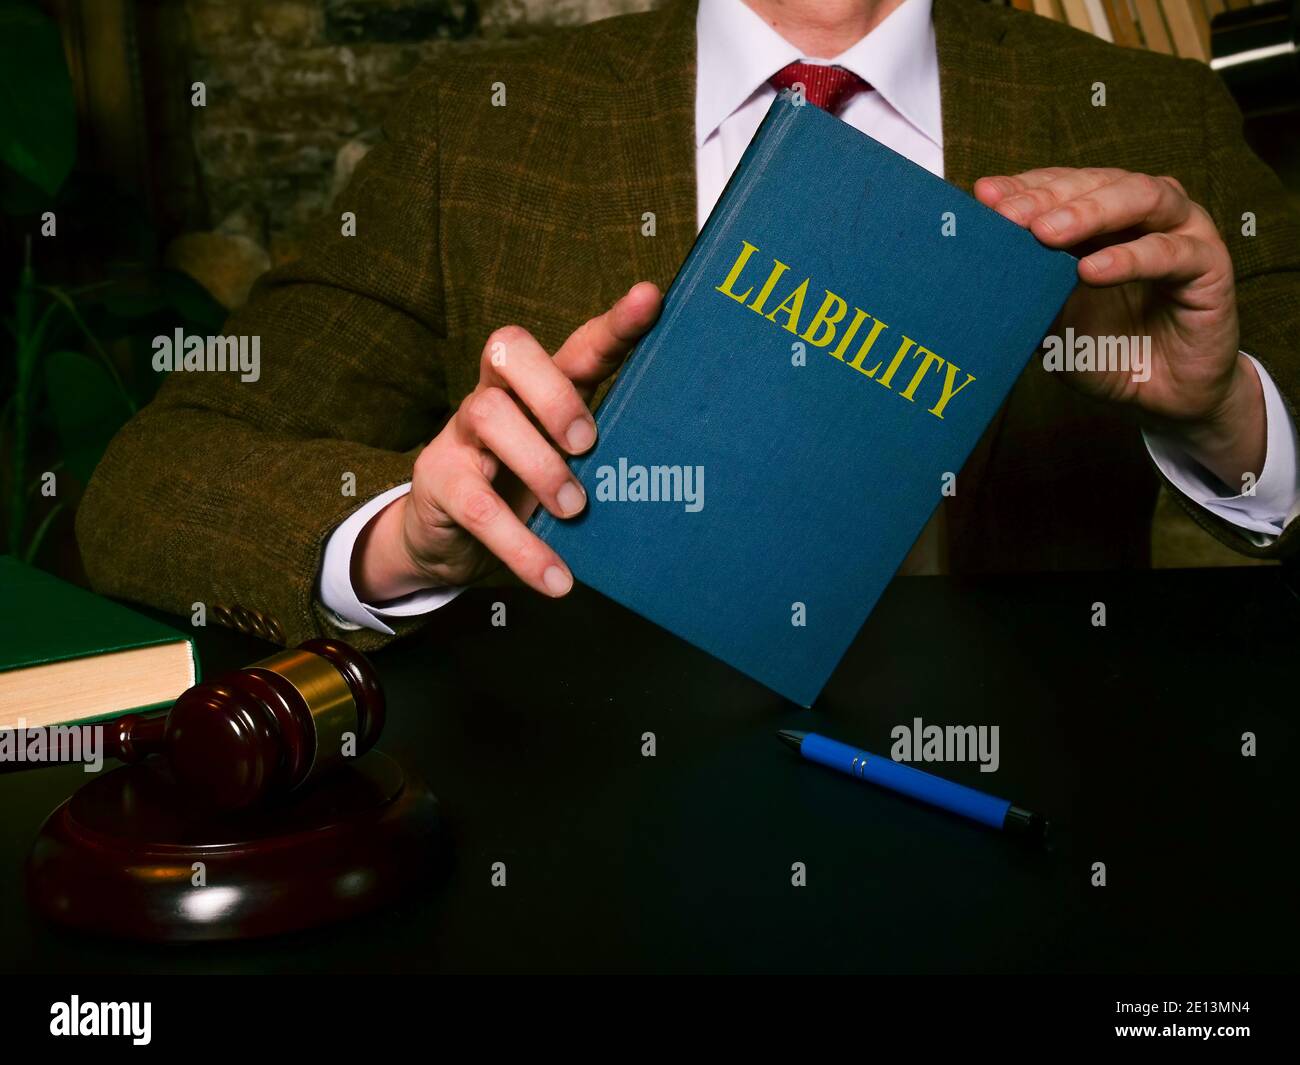 The lawyer at the table shows a book liability law. Stock Photo